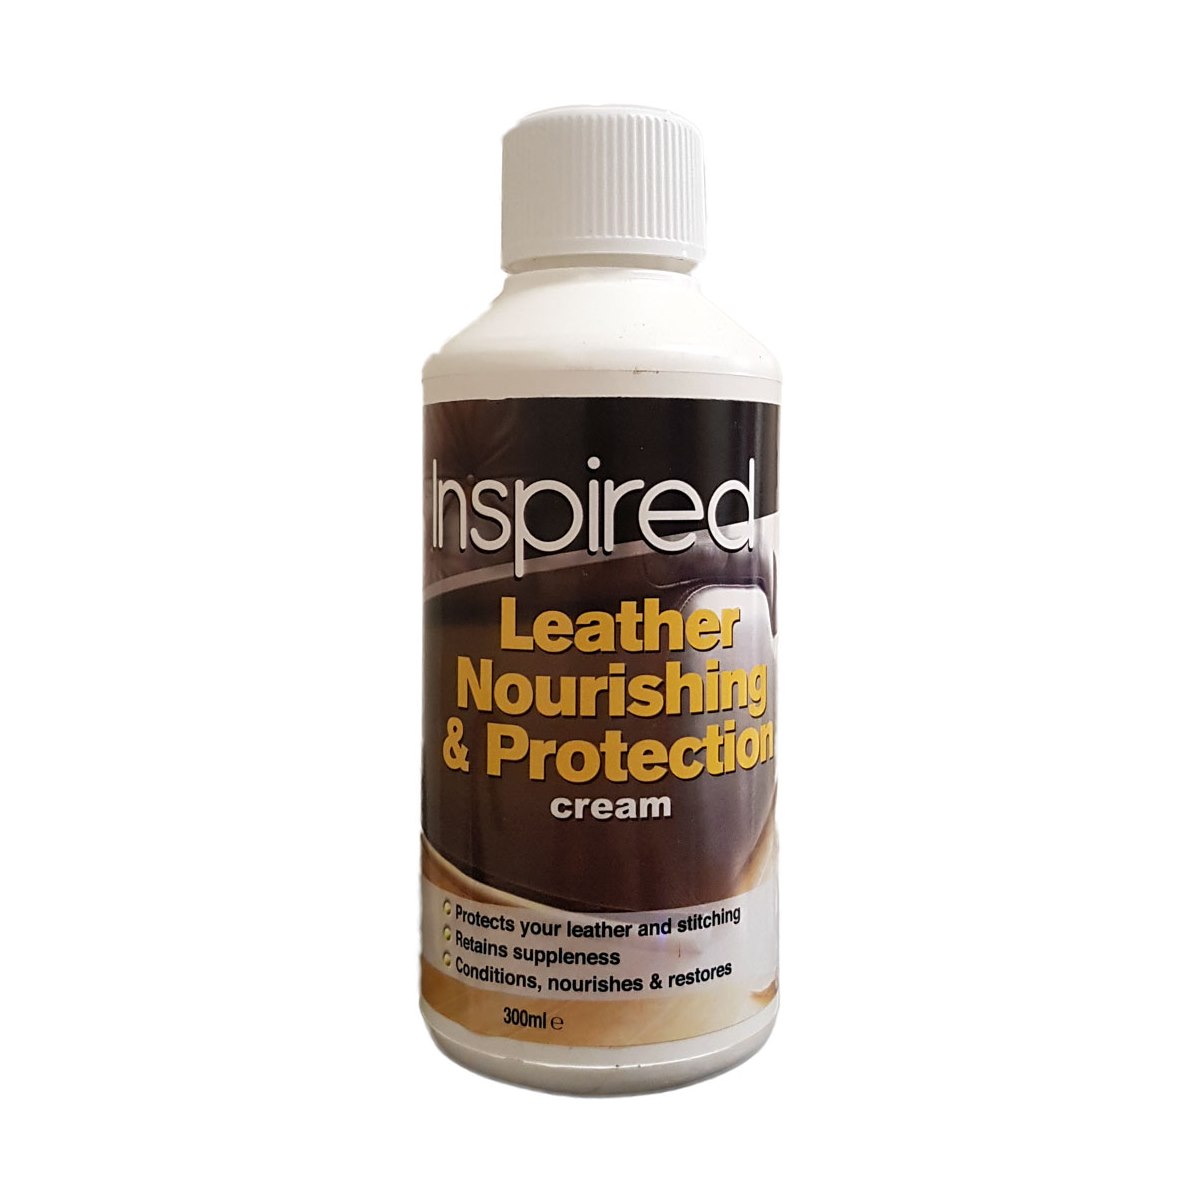 Inspired Leather Nourishing and Protection Cream 300ml